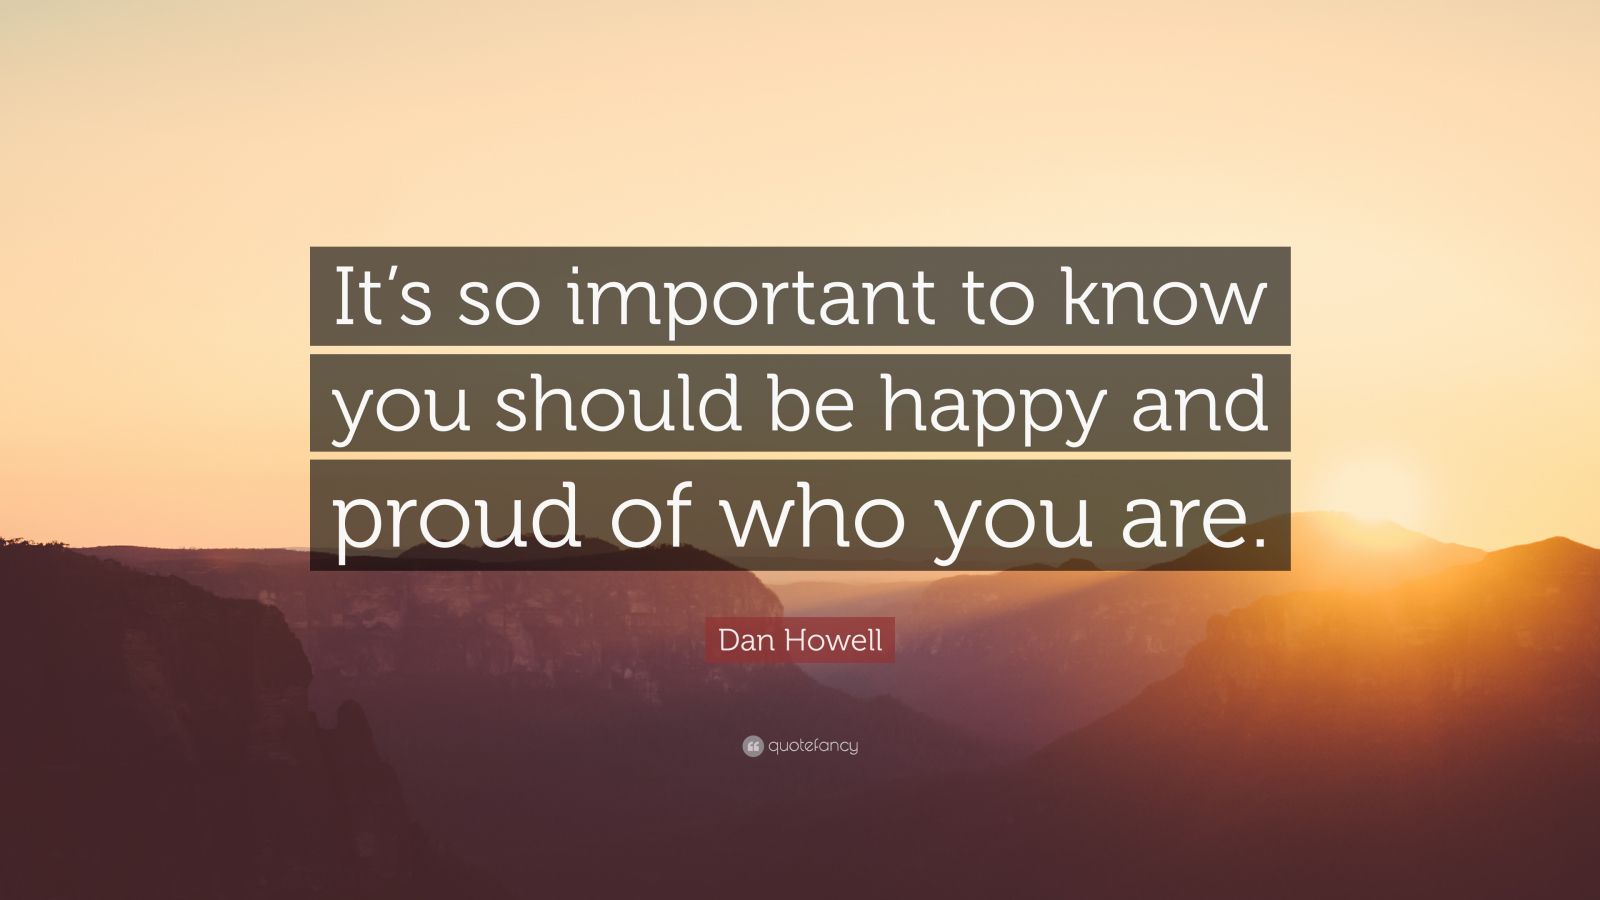 Dan Howell Quote: “It’s so important to know you should be happy and